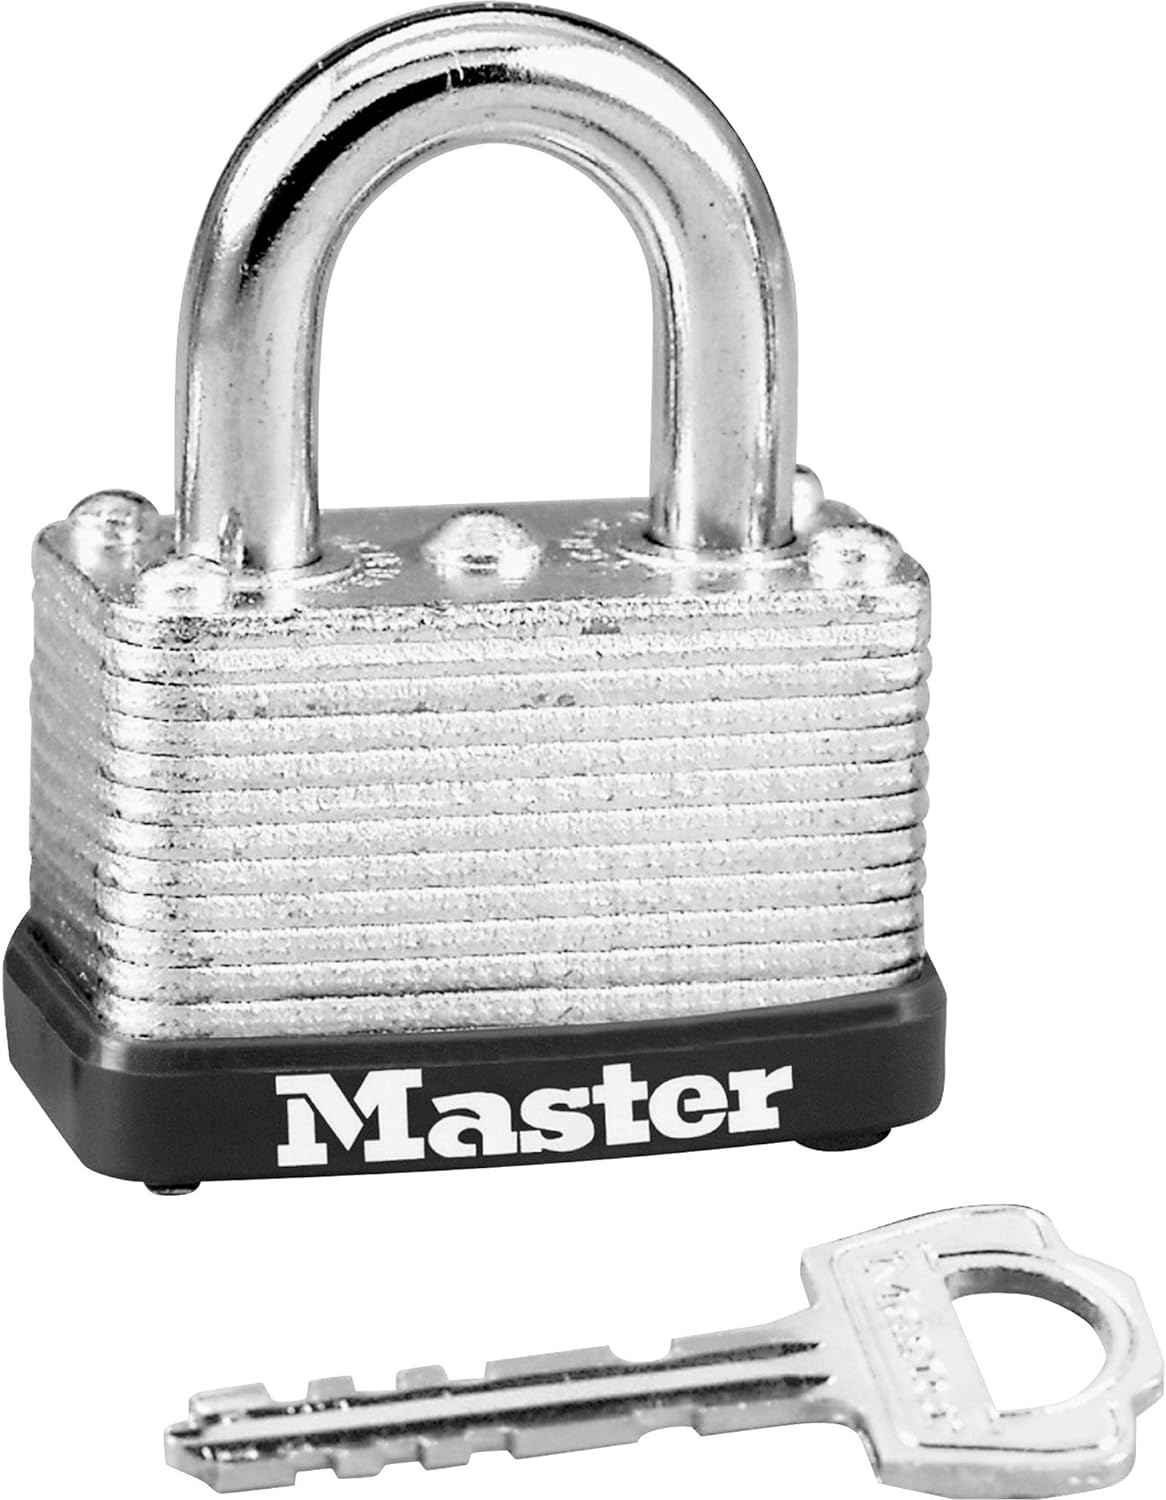 Master Lock 22D Laminated Steel Warded Padlock, 1-1/2-Inch Wide Body, 5/8-Inch Shackle Height,Silver